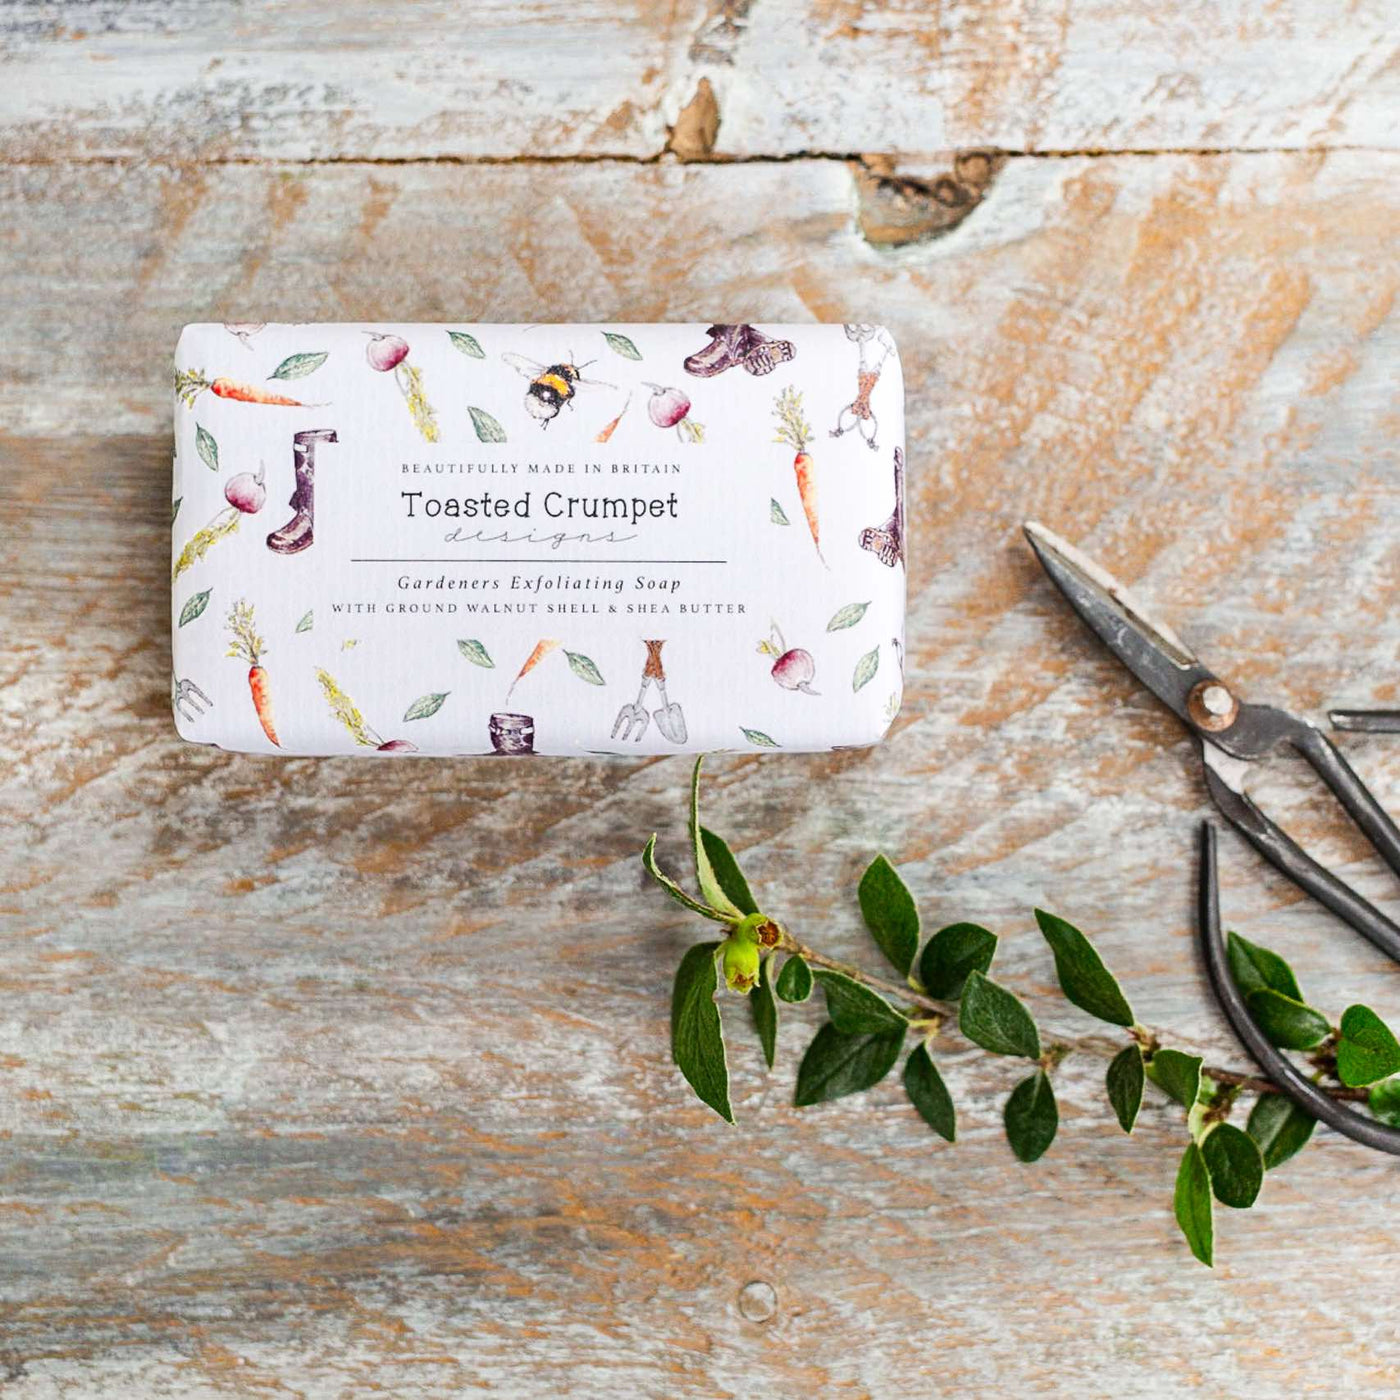 Toasted Crumpet - Gardeners Exfoilating 190g Soap Bar